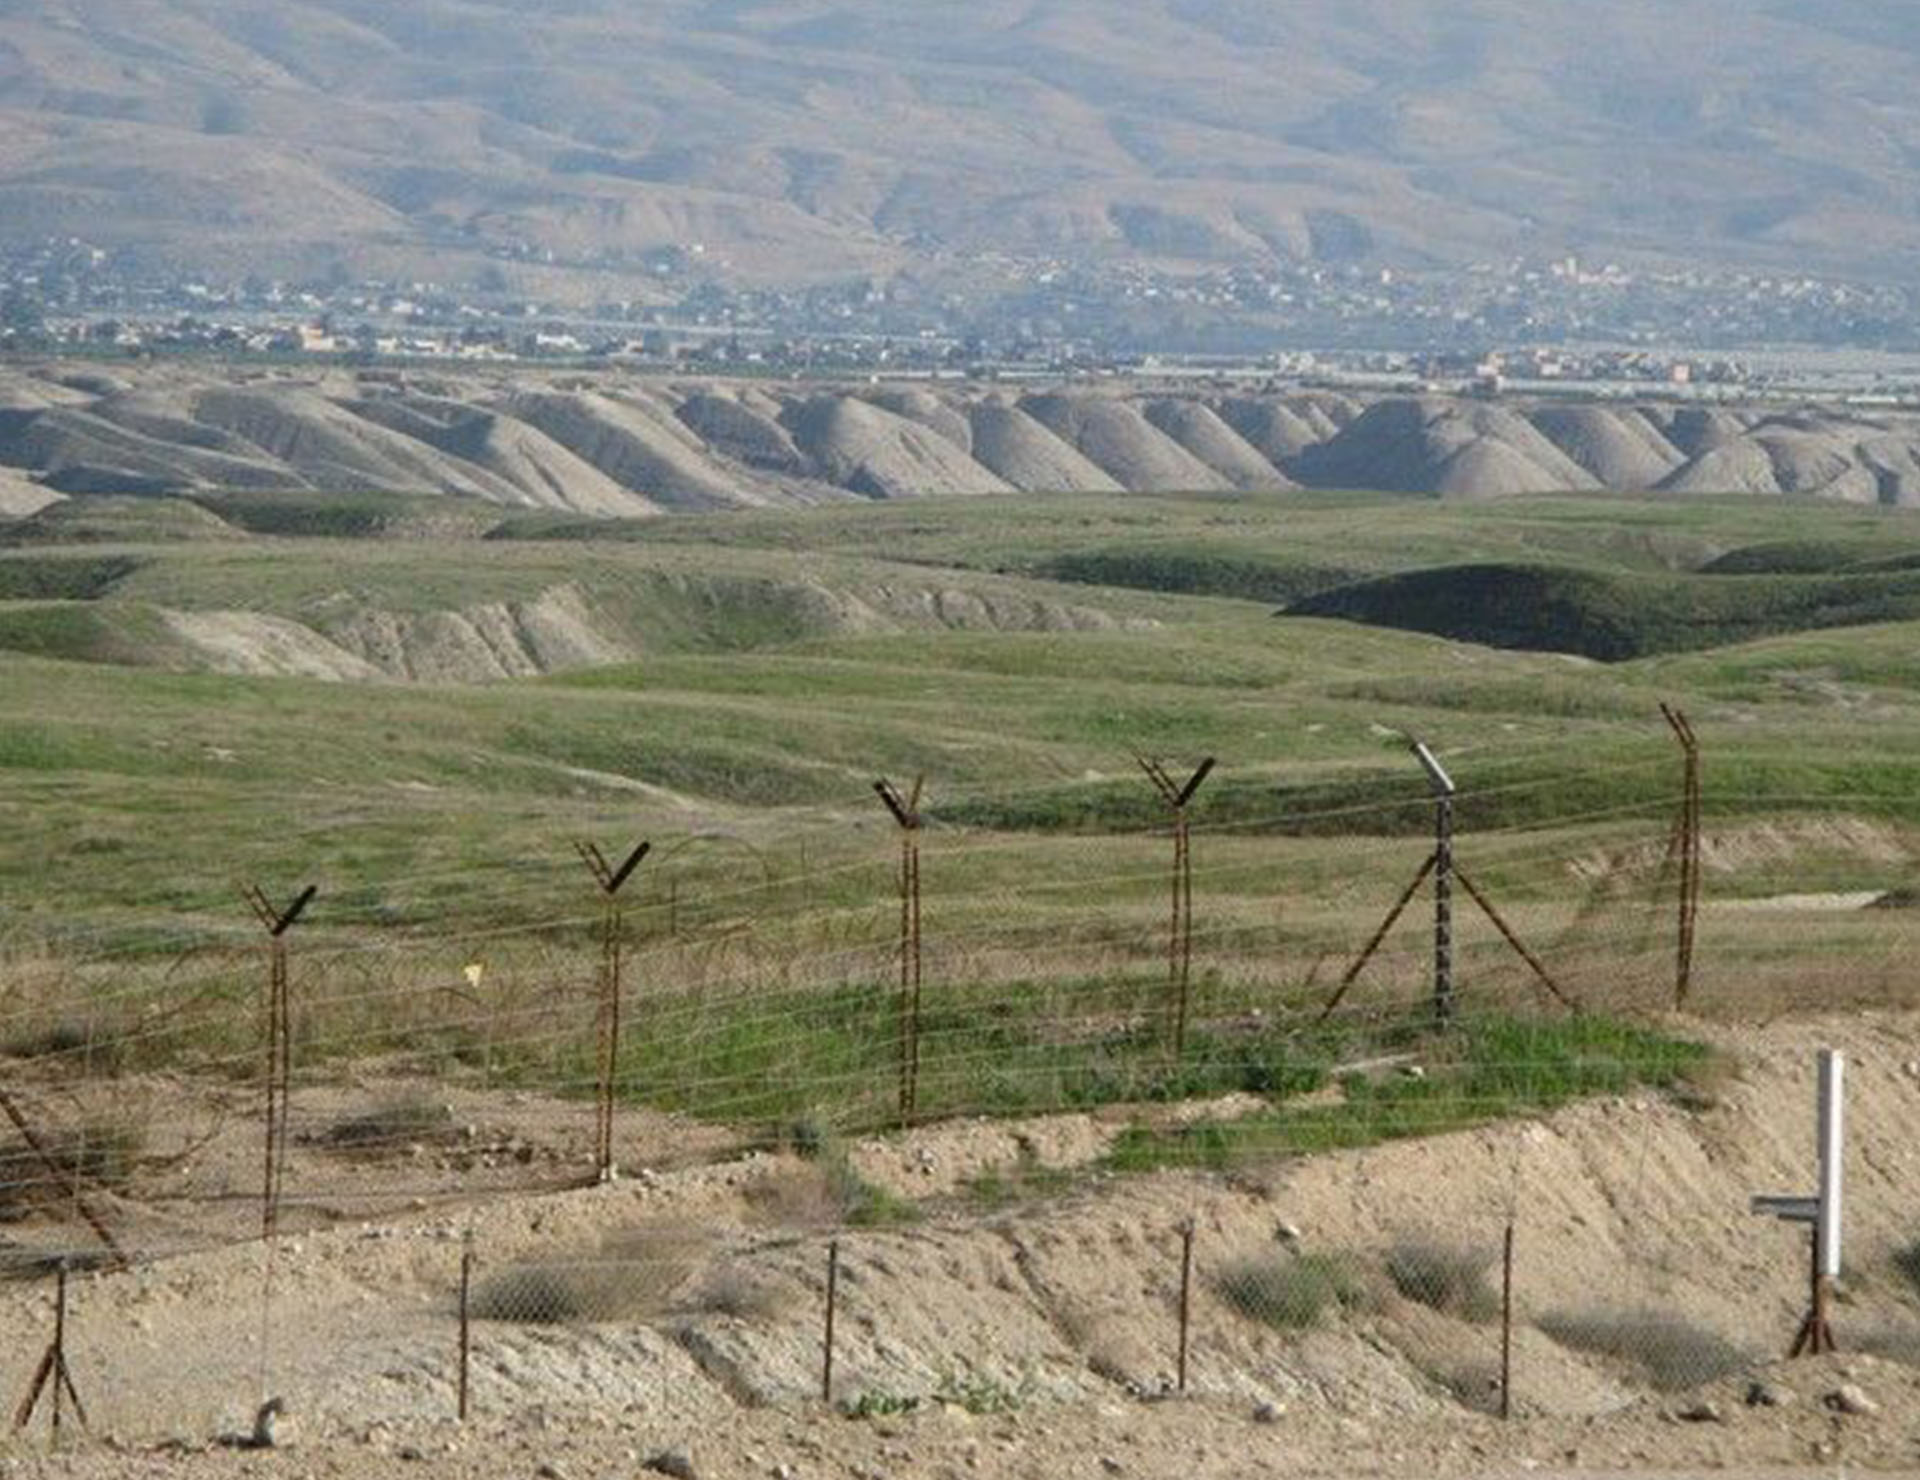 The demilitarized zone on the Armenian-Azerbaijan border is impossible